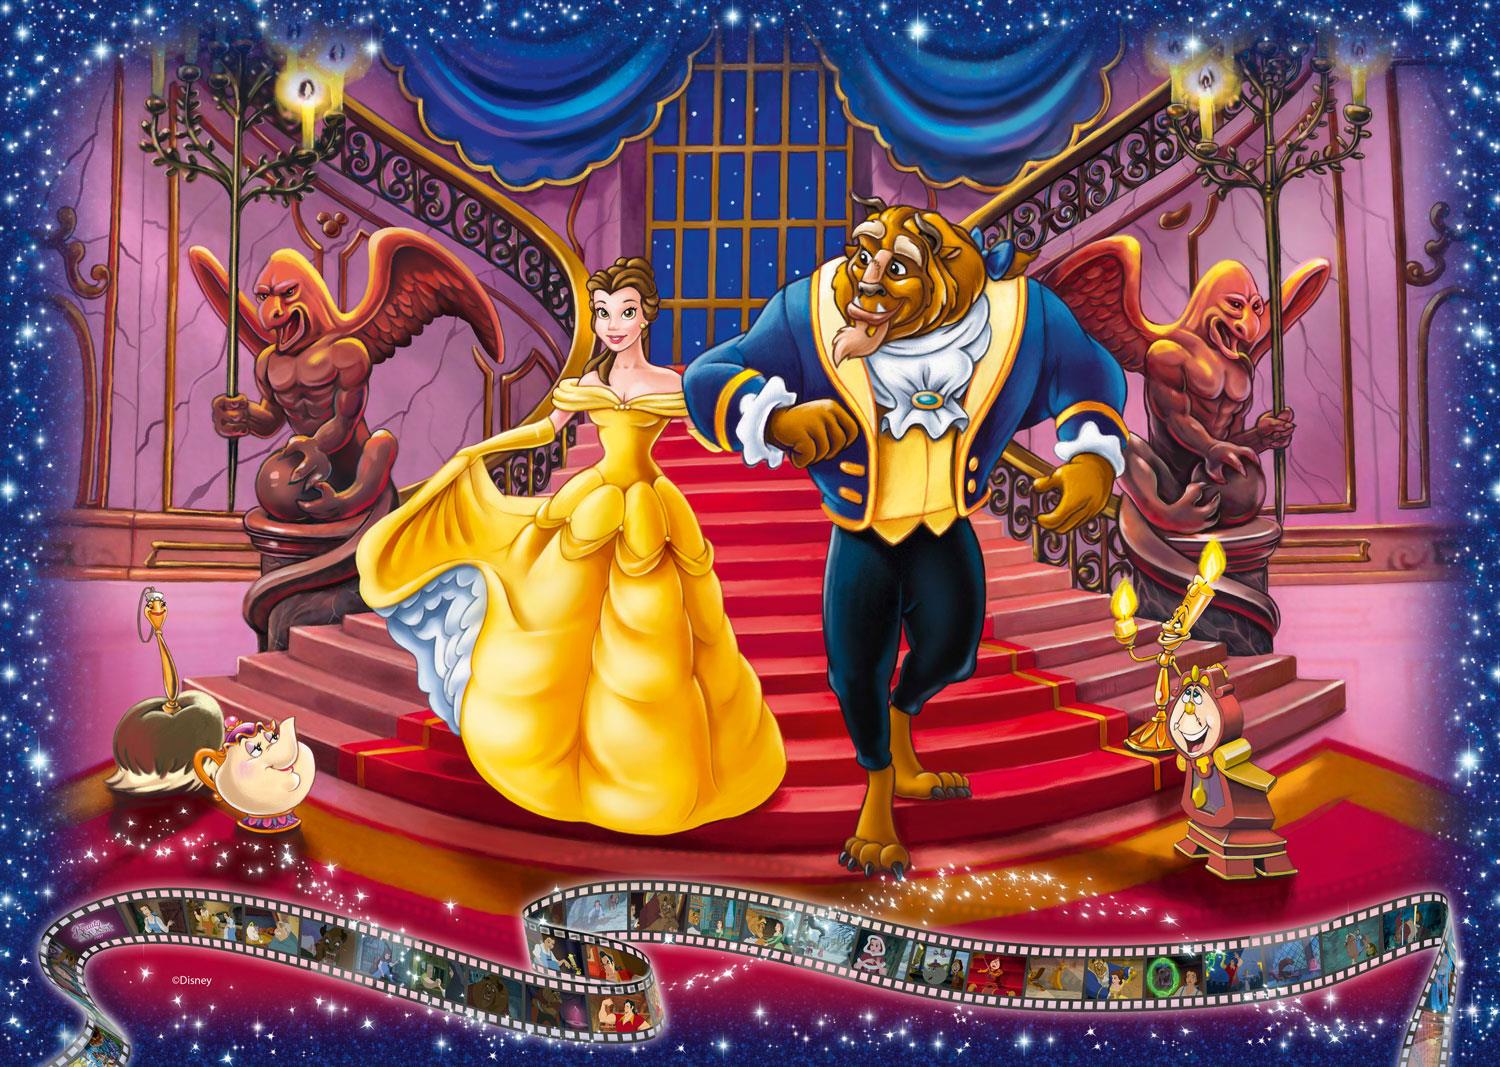 Ravensburger Disney Collector's Edition Beauty & The Beast Jigsaw Puzzle (1000 Pieces)